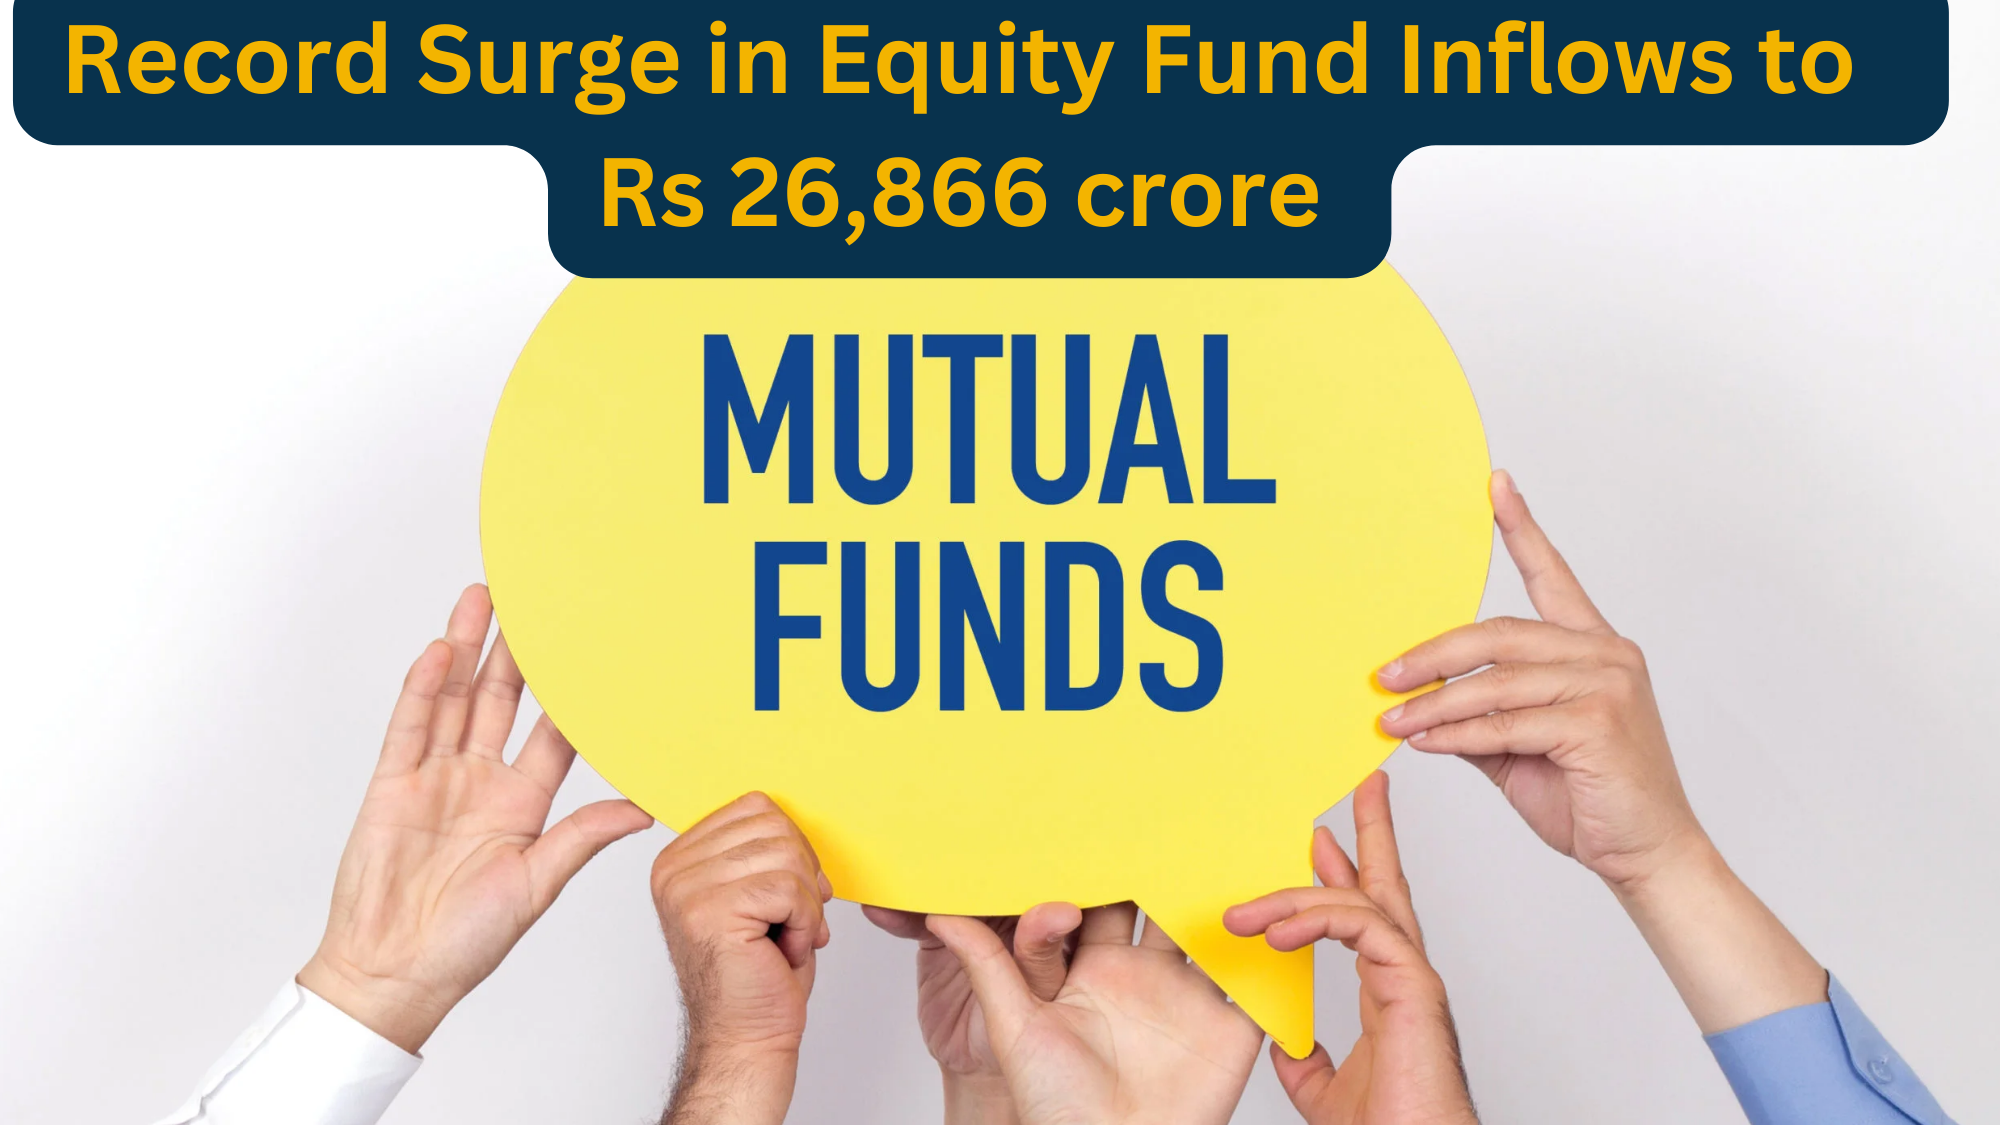 Record Surge in Equity Fund Inflows to Rs 26,866 crore